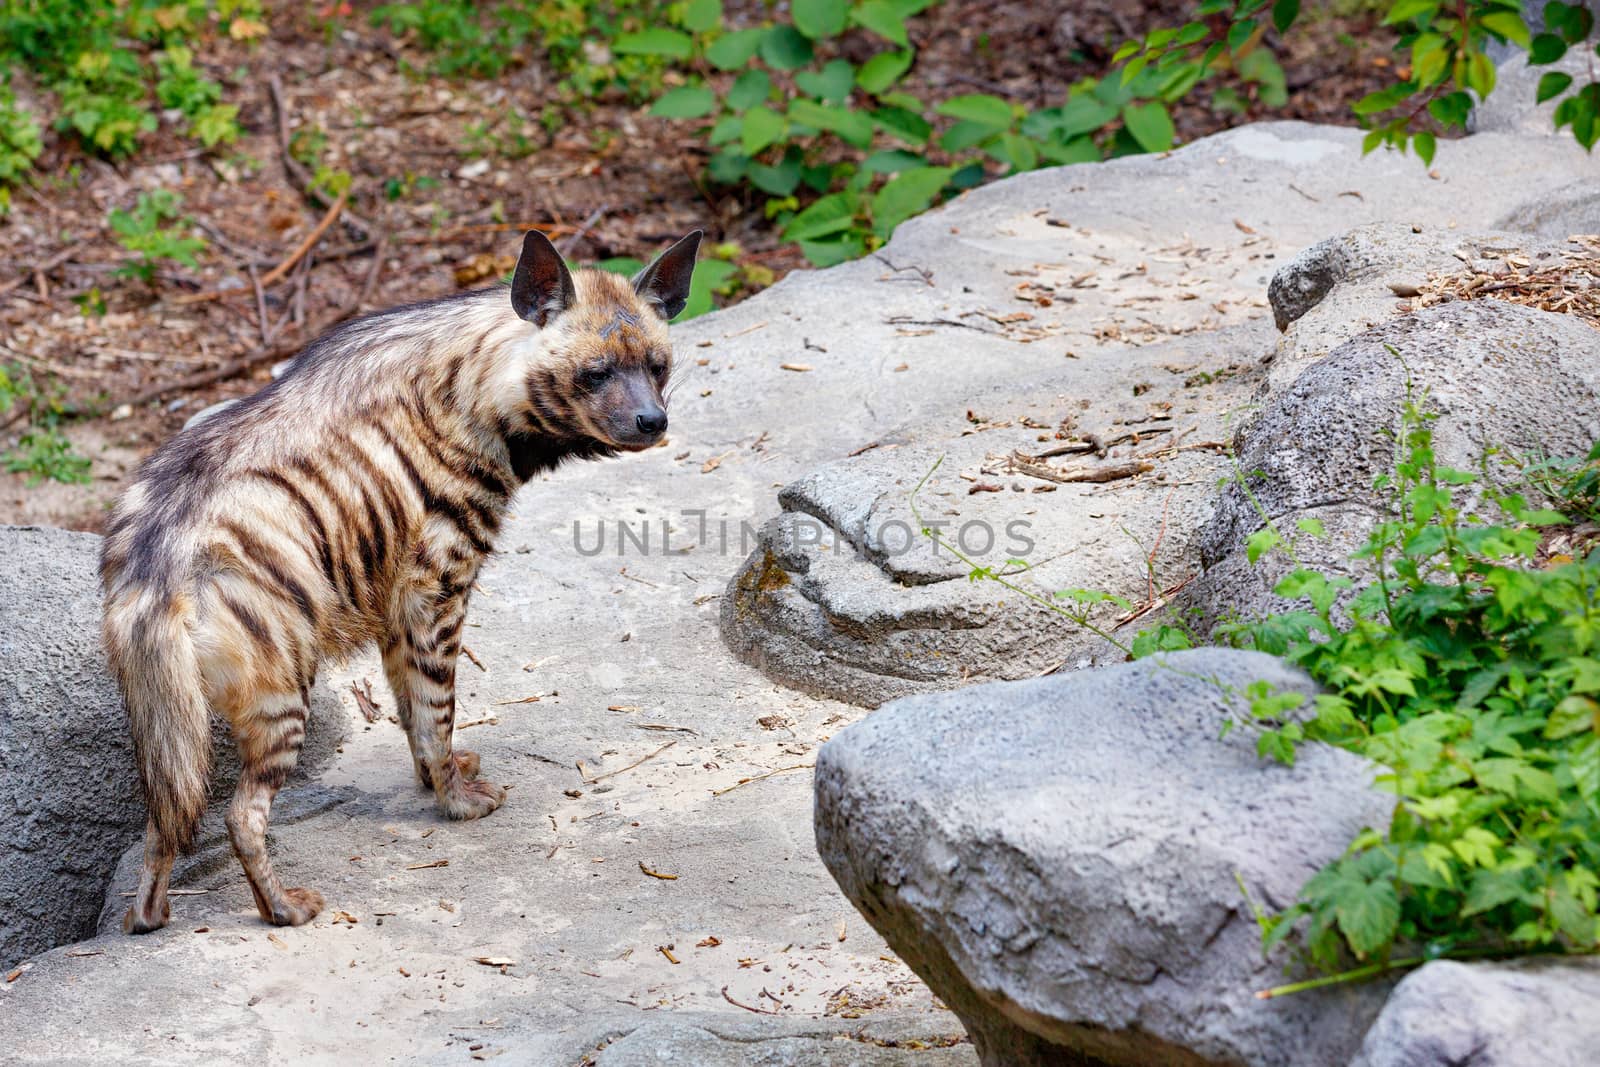 A striped hyena with alert ears walks among the stone boulders on a warm summer day.